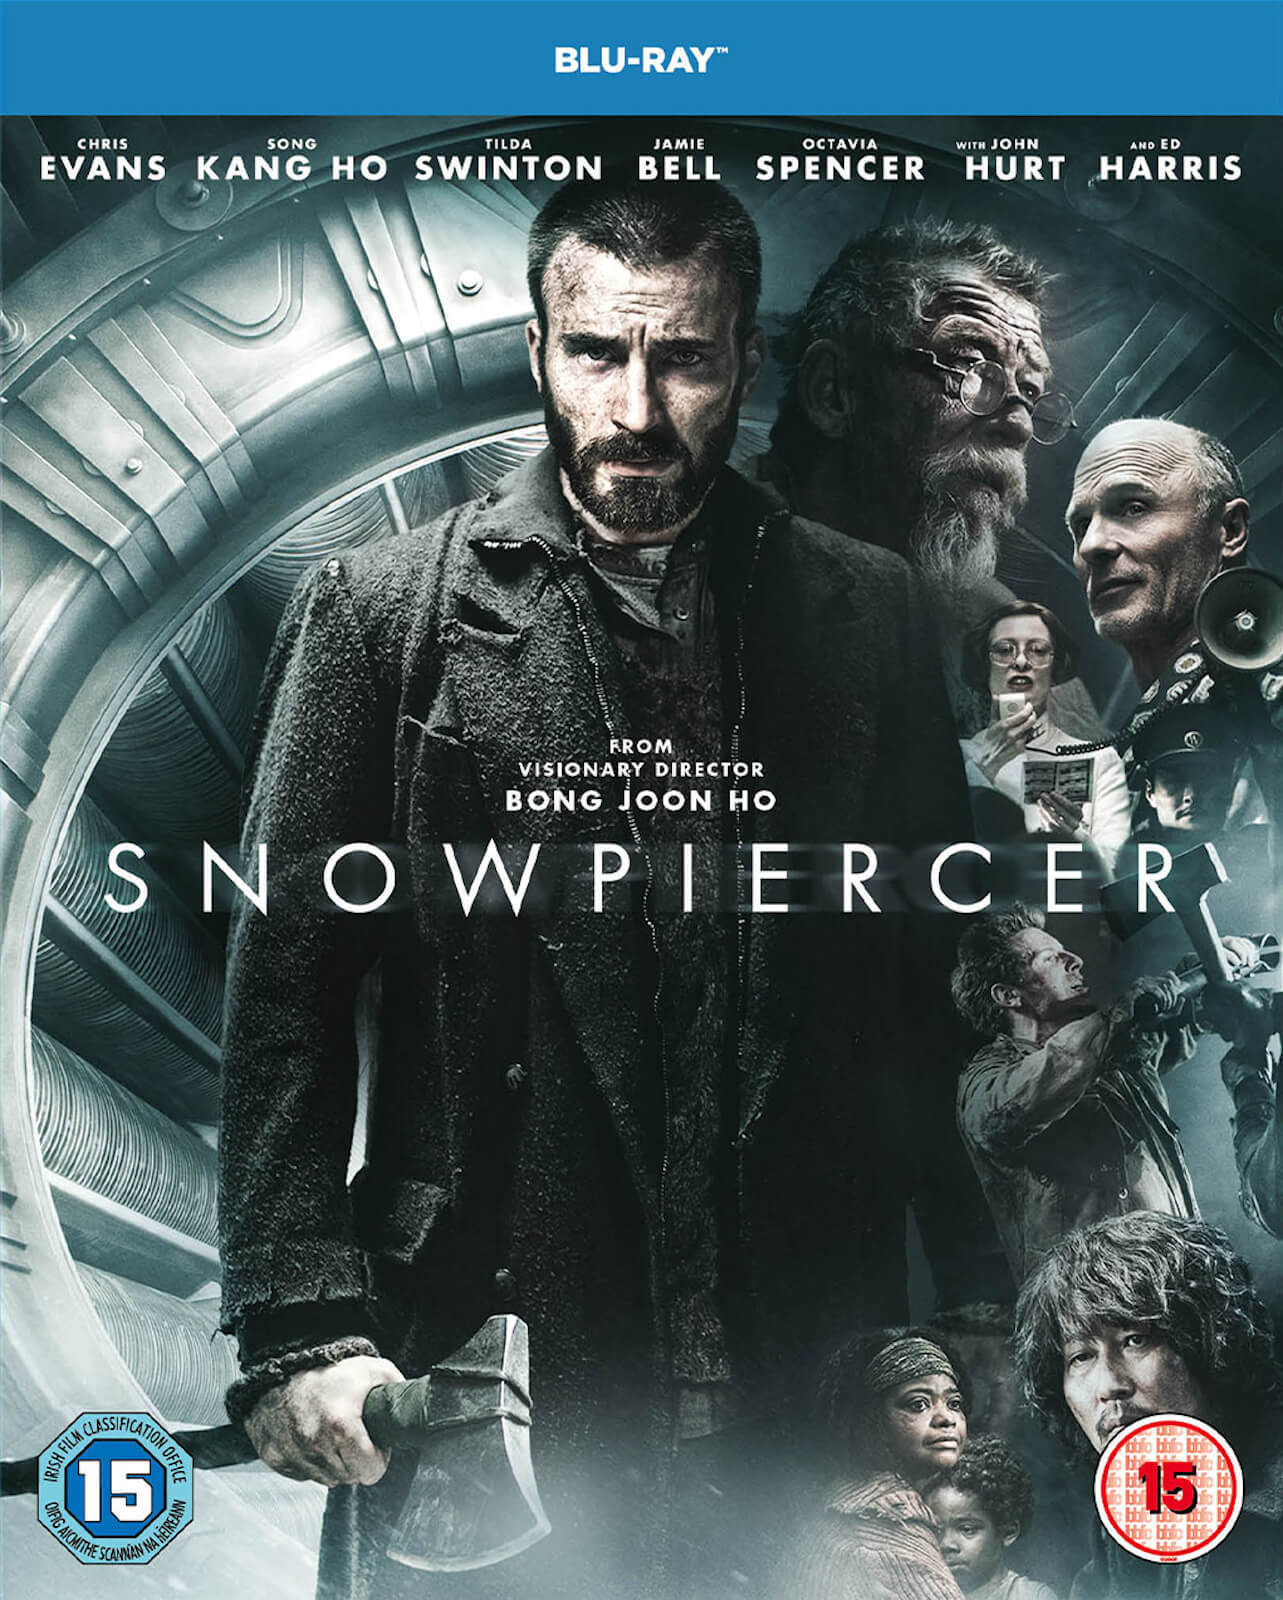 Snowpiercer (2013) El Expreso del Miedo (2013) Rompenieves (2013) [AC3 2.0 + SUP/SRT] [Blu Ray-Rip] 268059_front